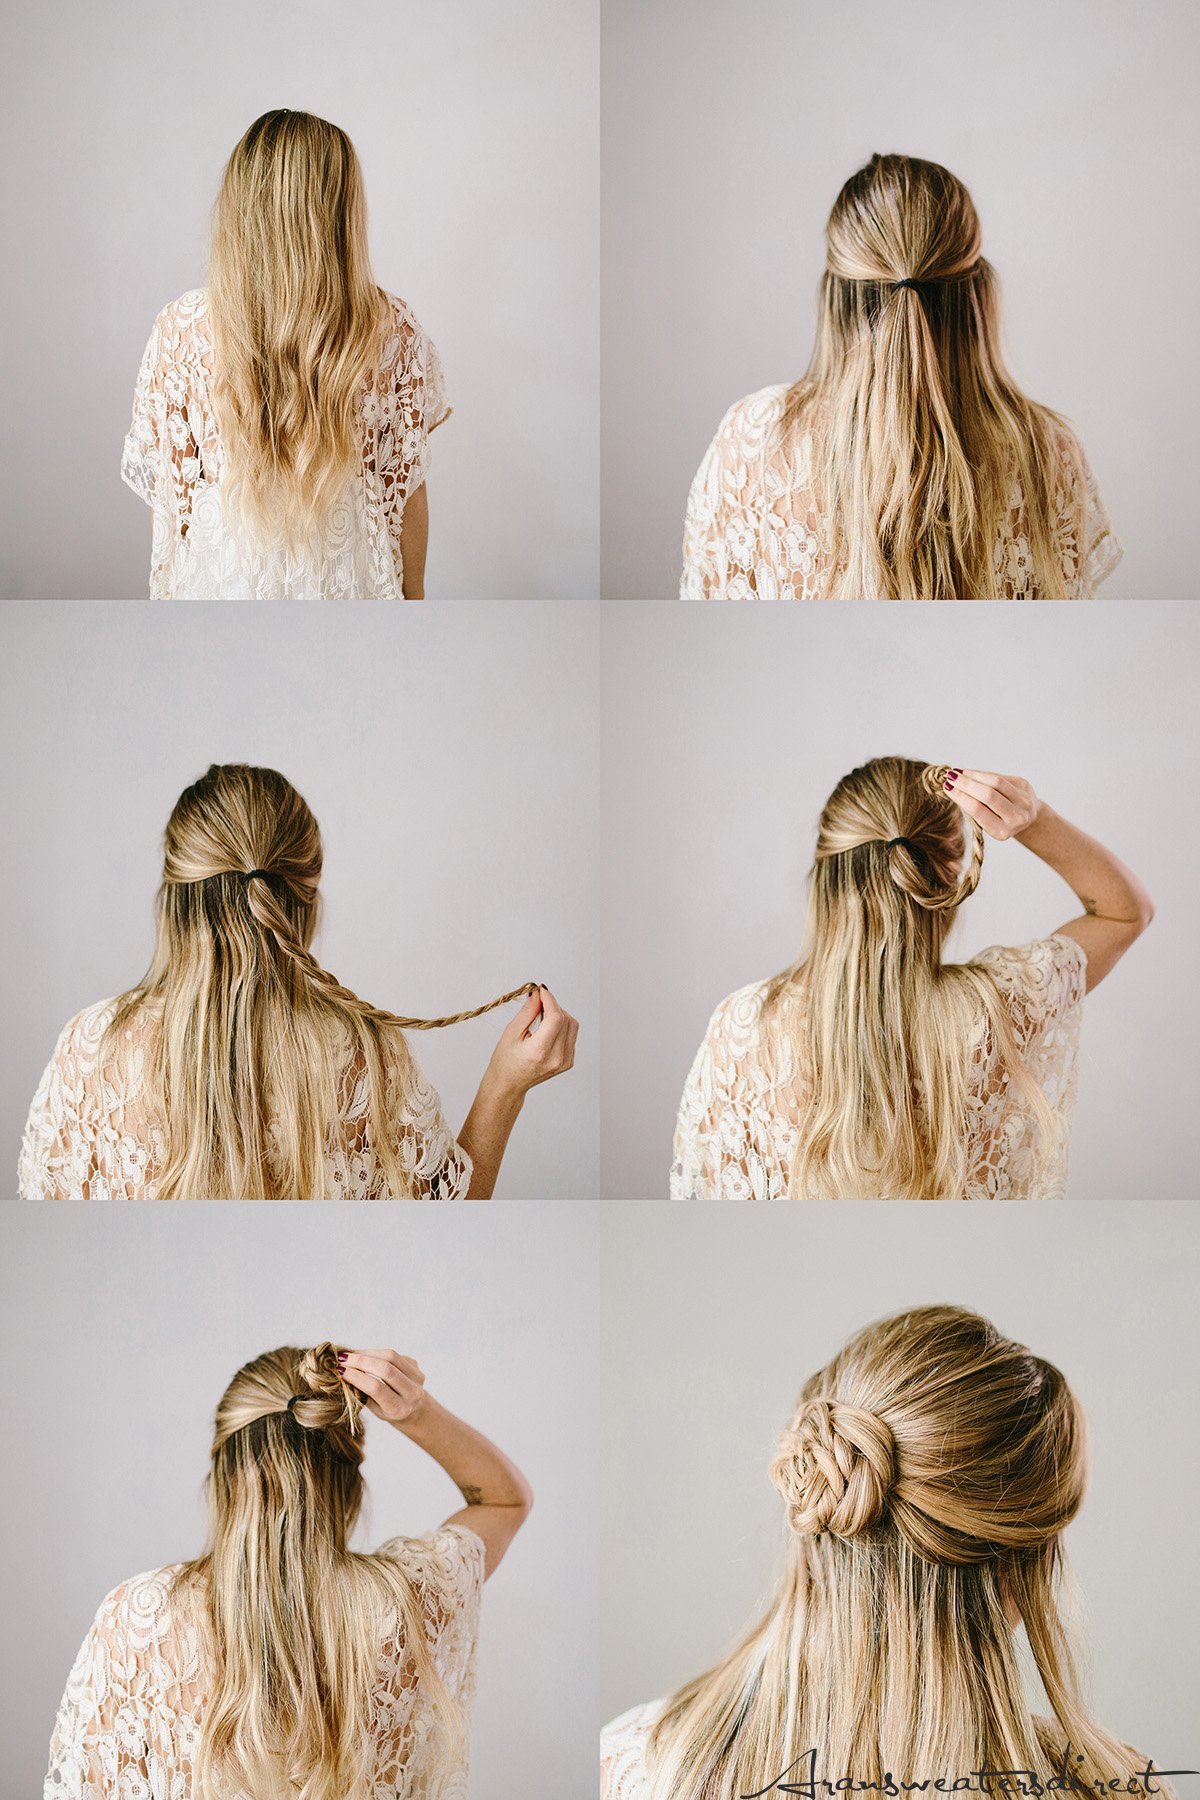 15 SuperEasy Hairstyles for For Busy Mornings